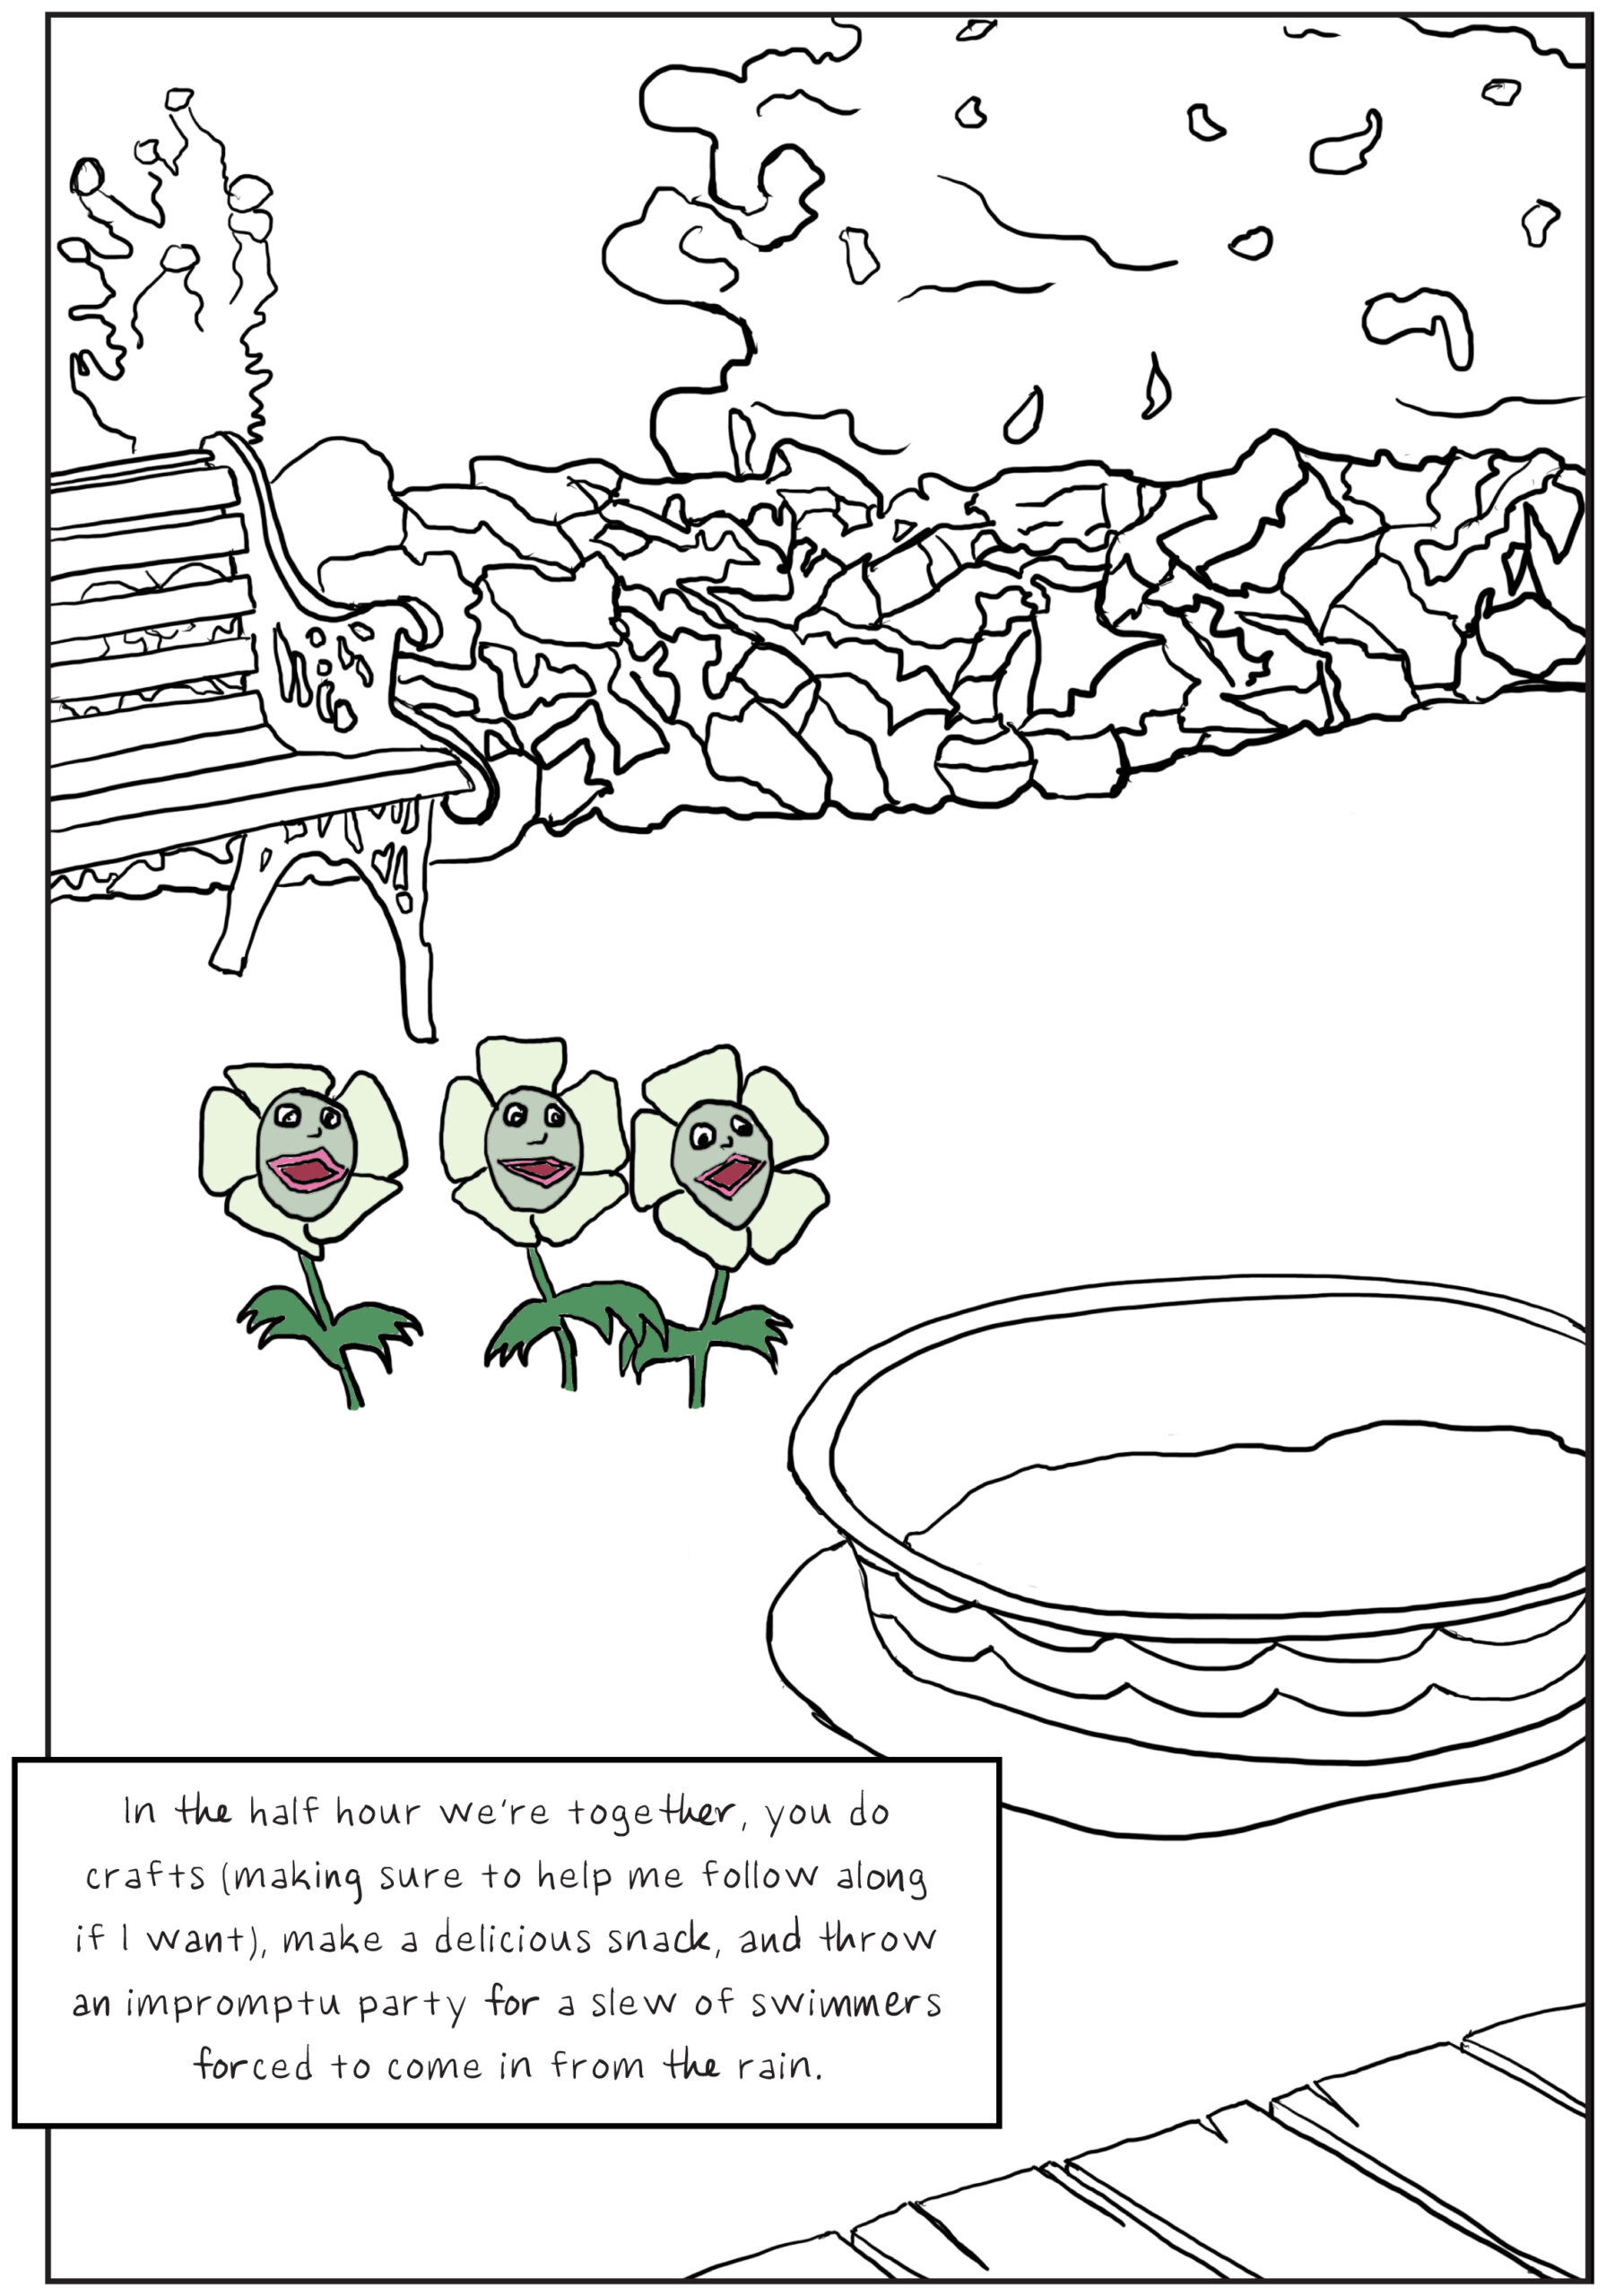 A black and white drawing of a suburban backyard with a filled kiddie pool prominently featured. Three anthropomorphic daises growing from the lawn are the only things in color. Text: In the half hour we’re together, you do crafts (making sure to help me follow along if I want), make a delicious snack, and throw an impromptu party for a slew of swimmers forced to come in from the rain.